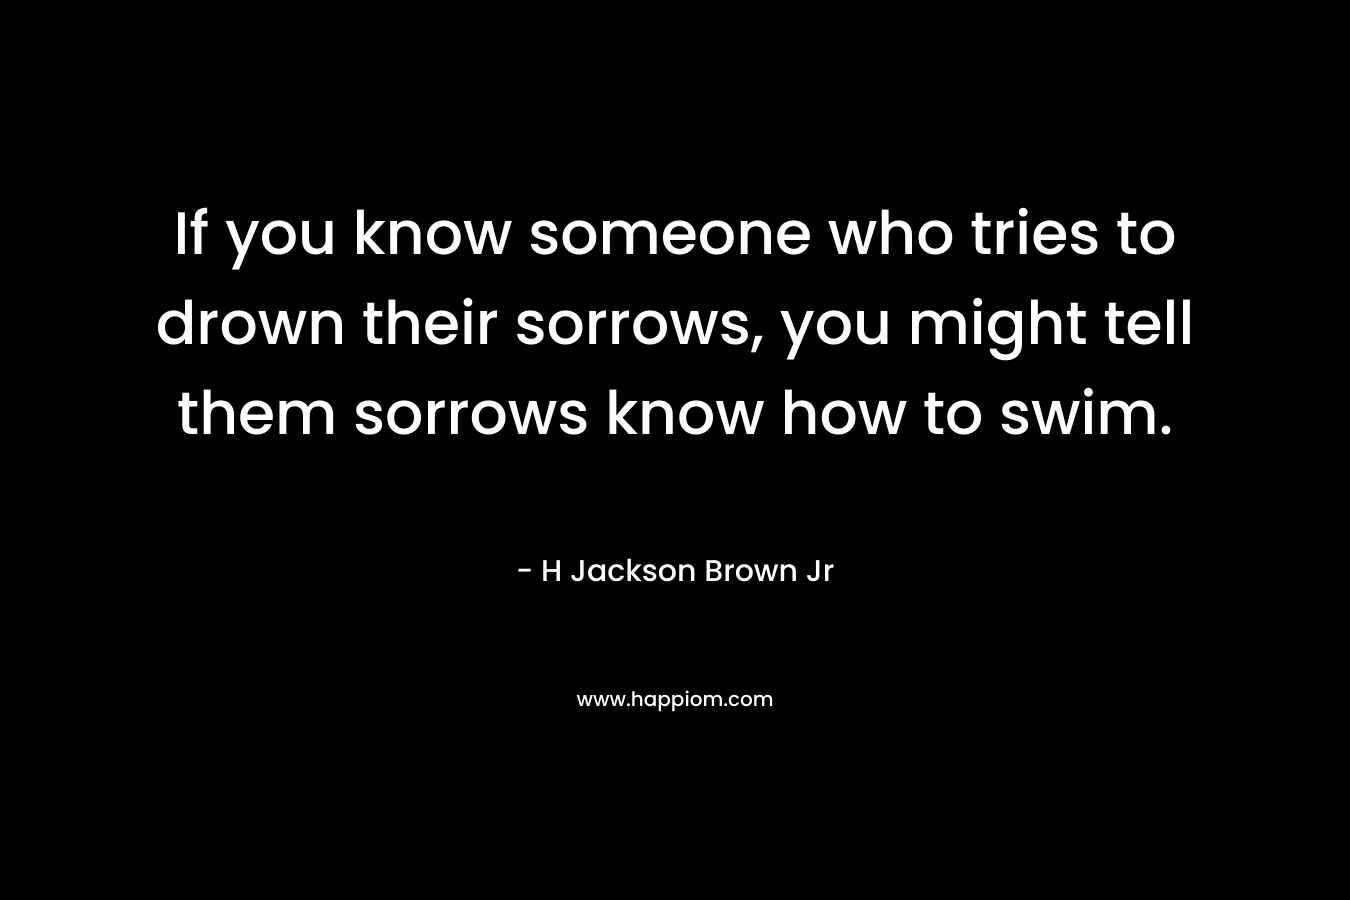 If you know someone who tries to drown their sorrows, you might tell them sorrows know how to swim. – H Jackson Brown Jr